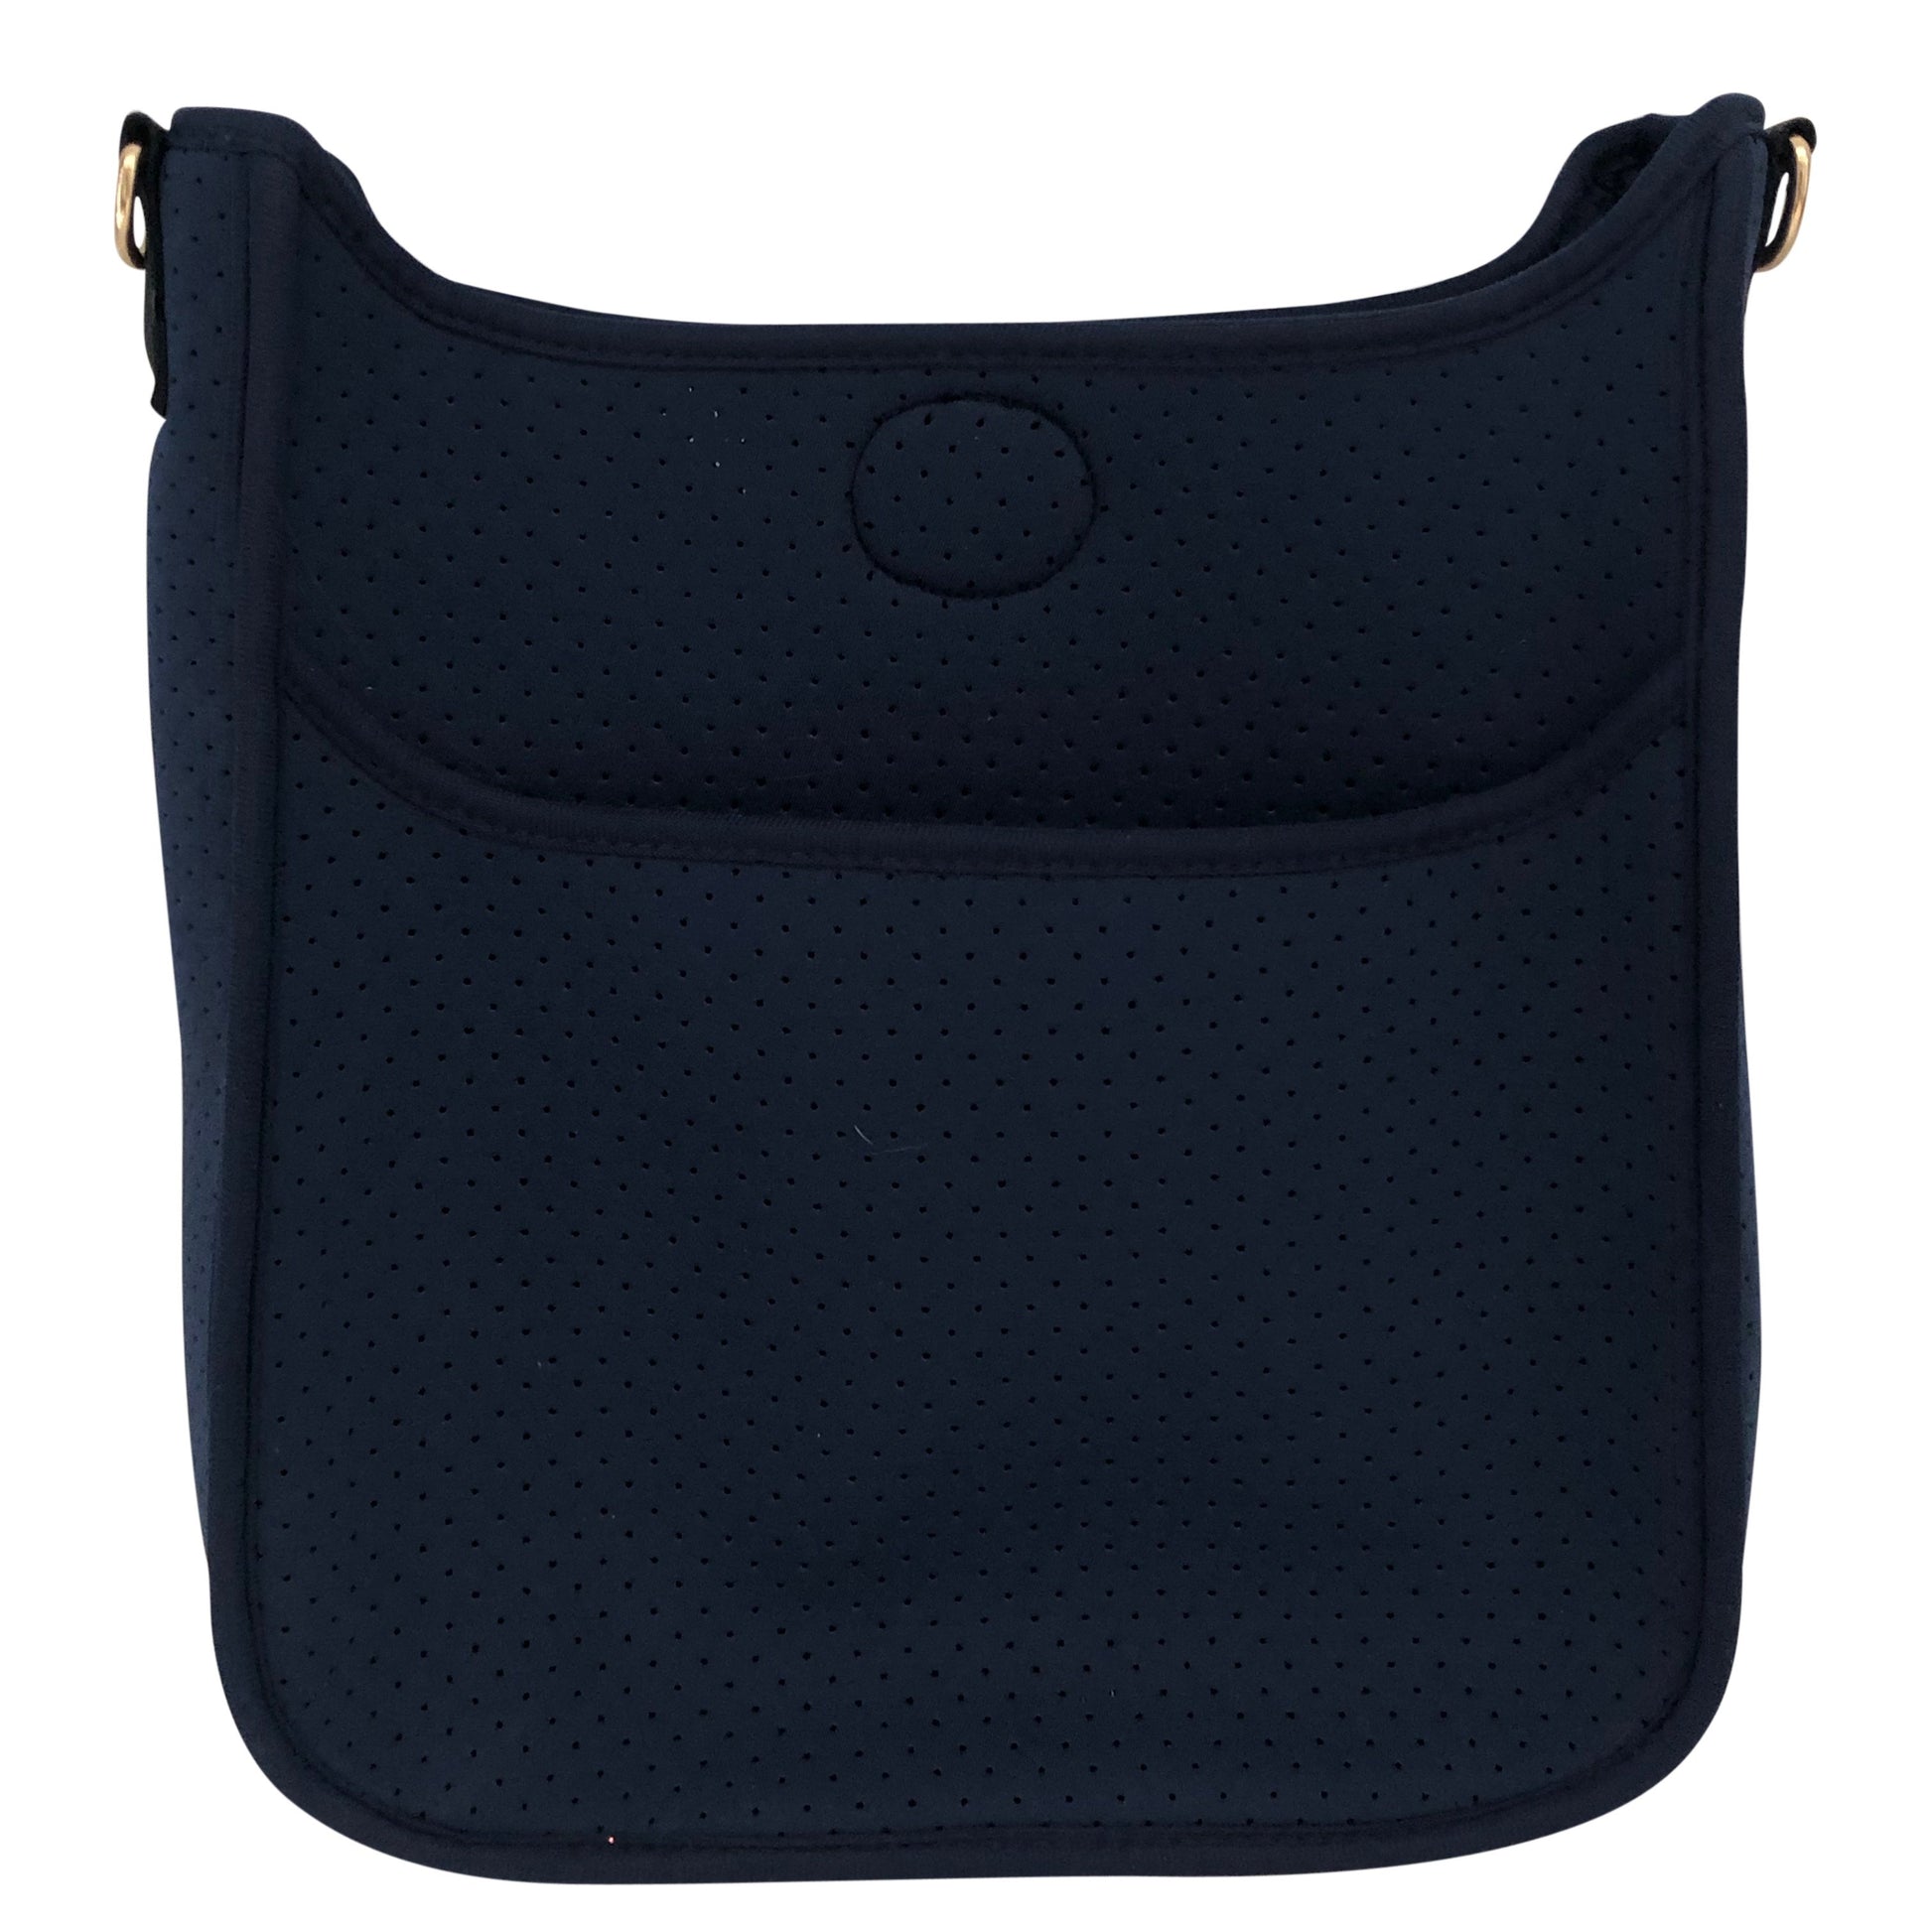 Navy Perforated Neoprene Messenger Bag (no strap attached) Women's Accessories Ahdorned   